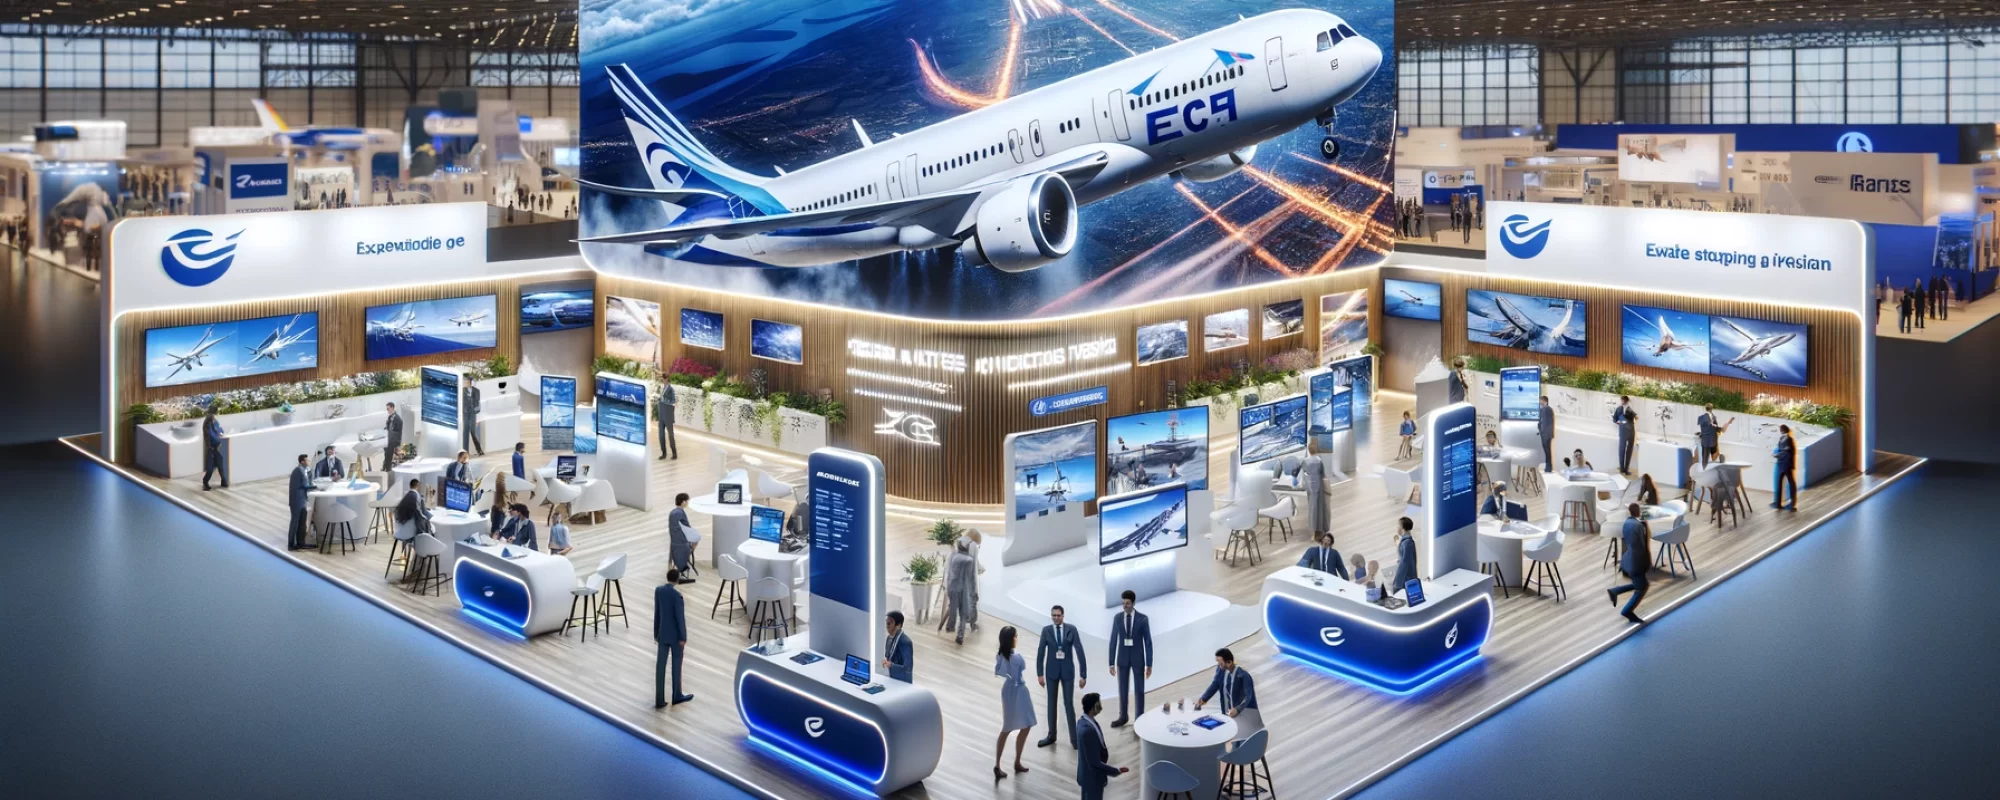 DALL·E 2024-02-18 18.32.59 - Create another wide, photorealistic image of an aviation company's booth at a trade show, showcasing a different layout and design. This booth is set